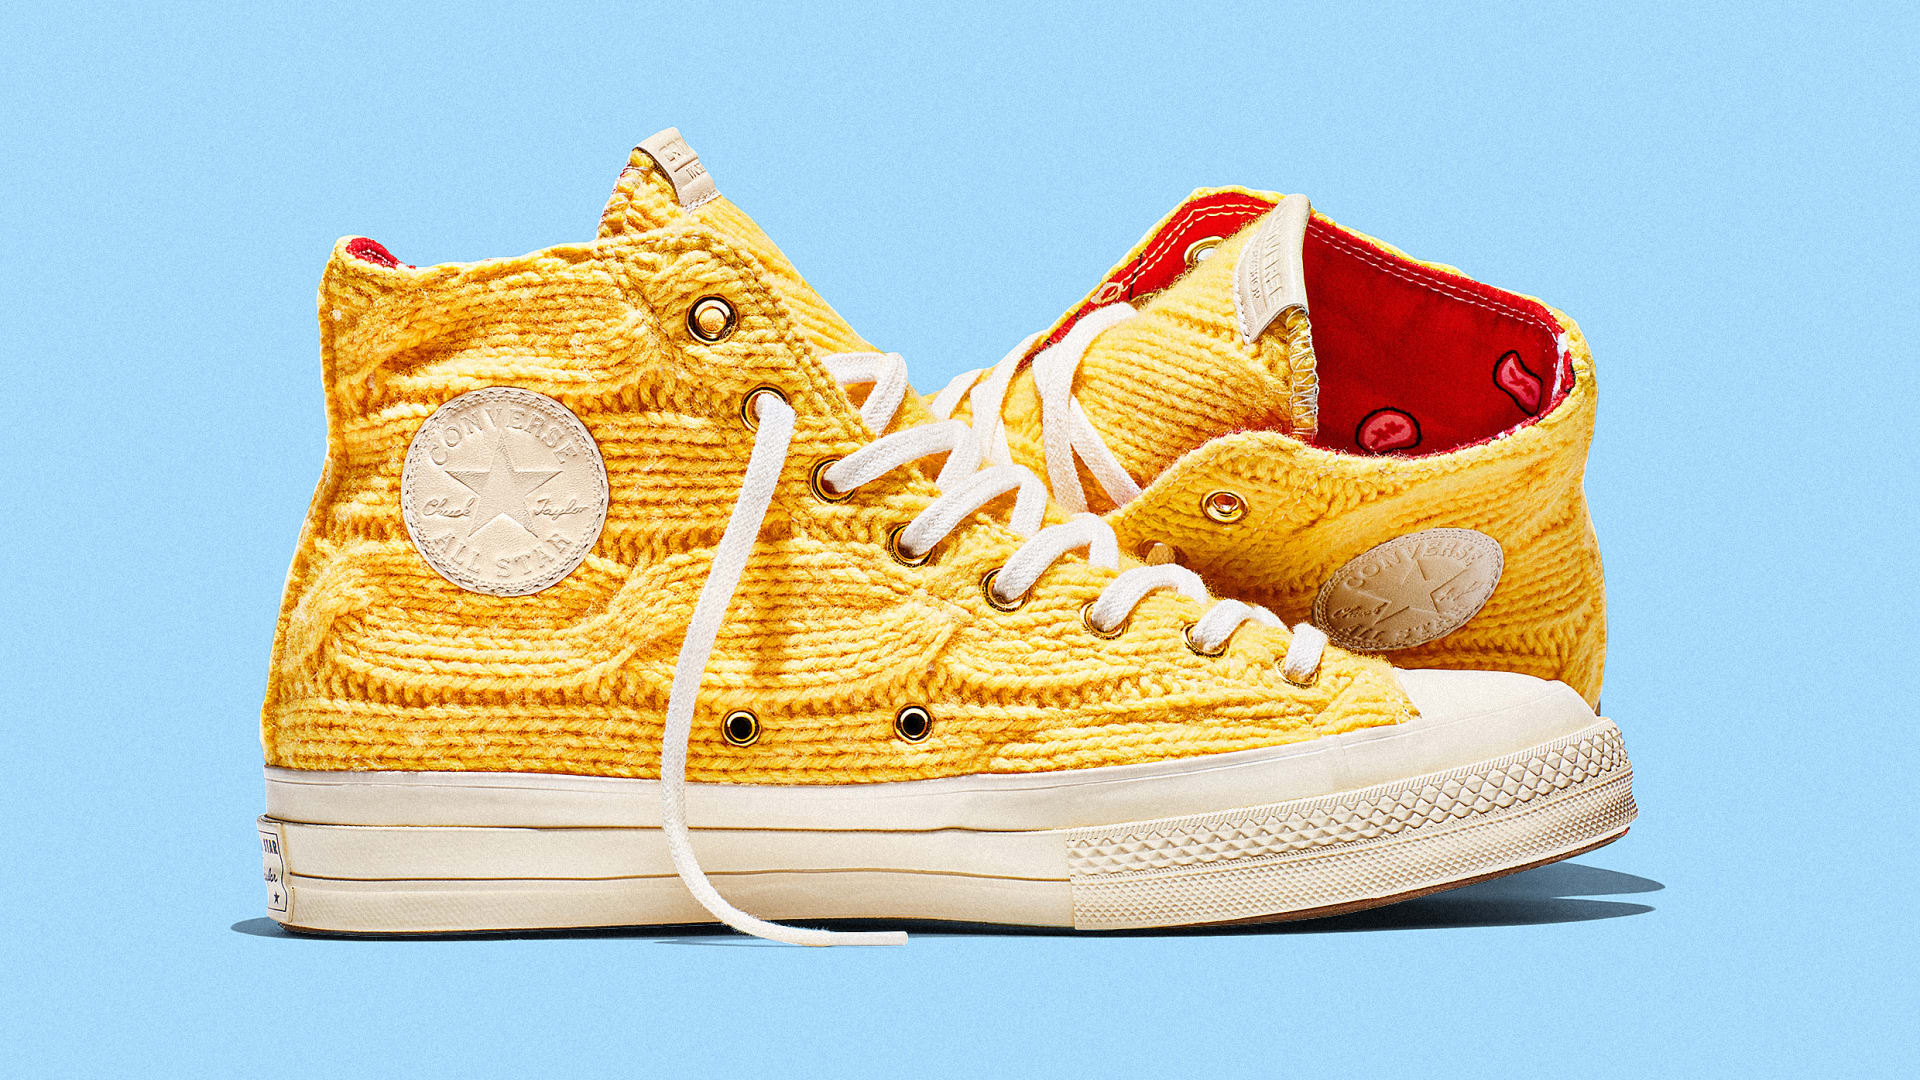 Converse is quietly reinventing one of America’s most iconic sneakers